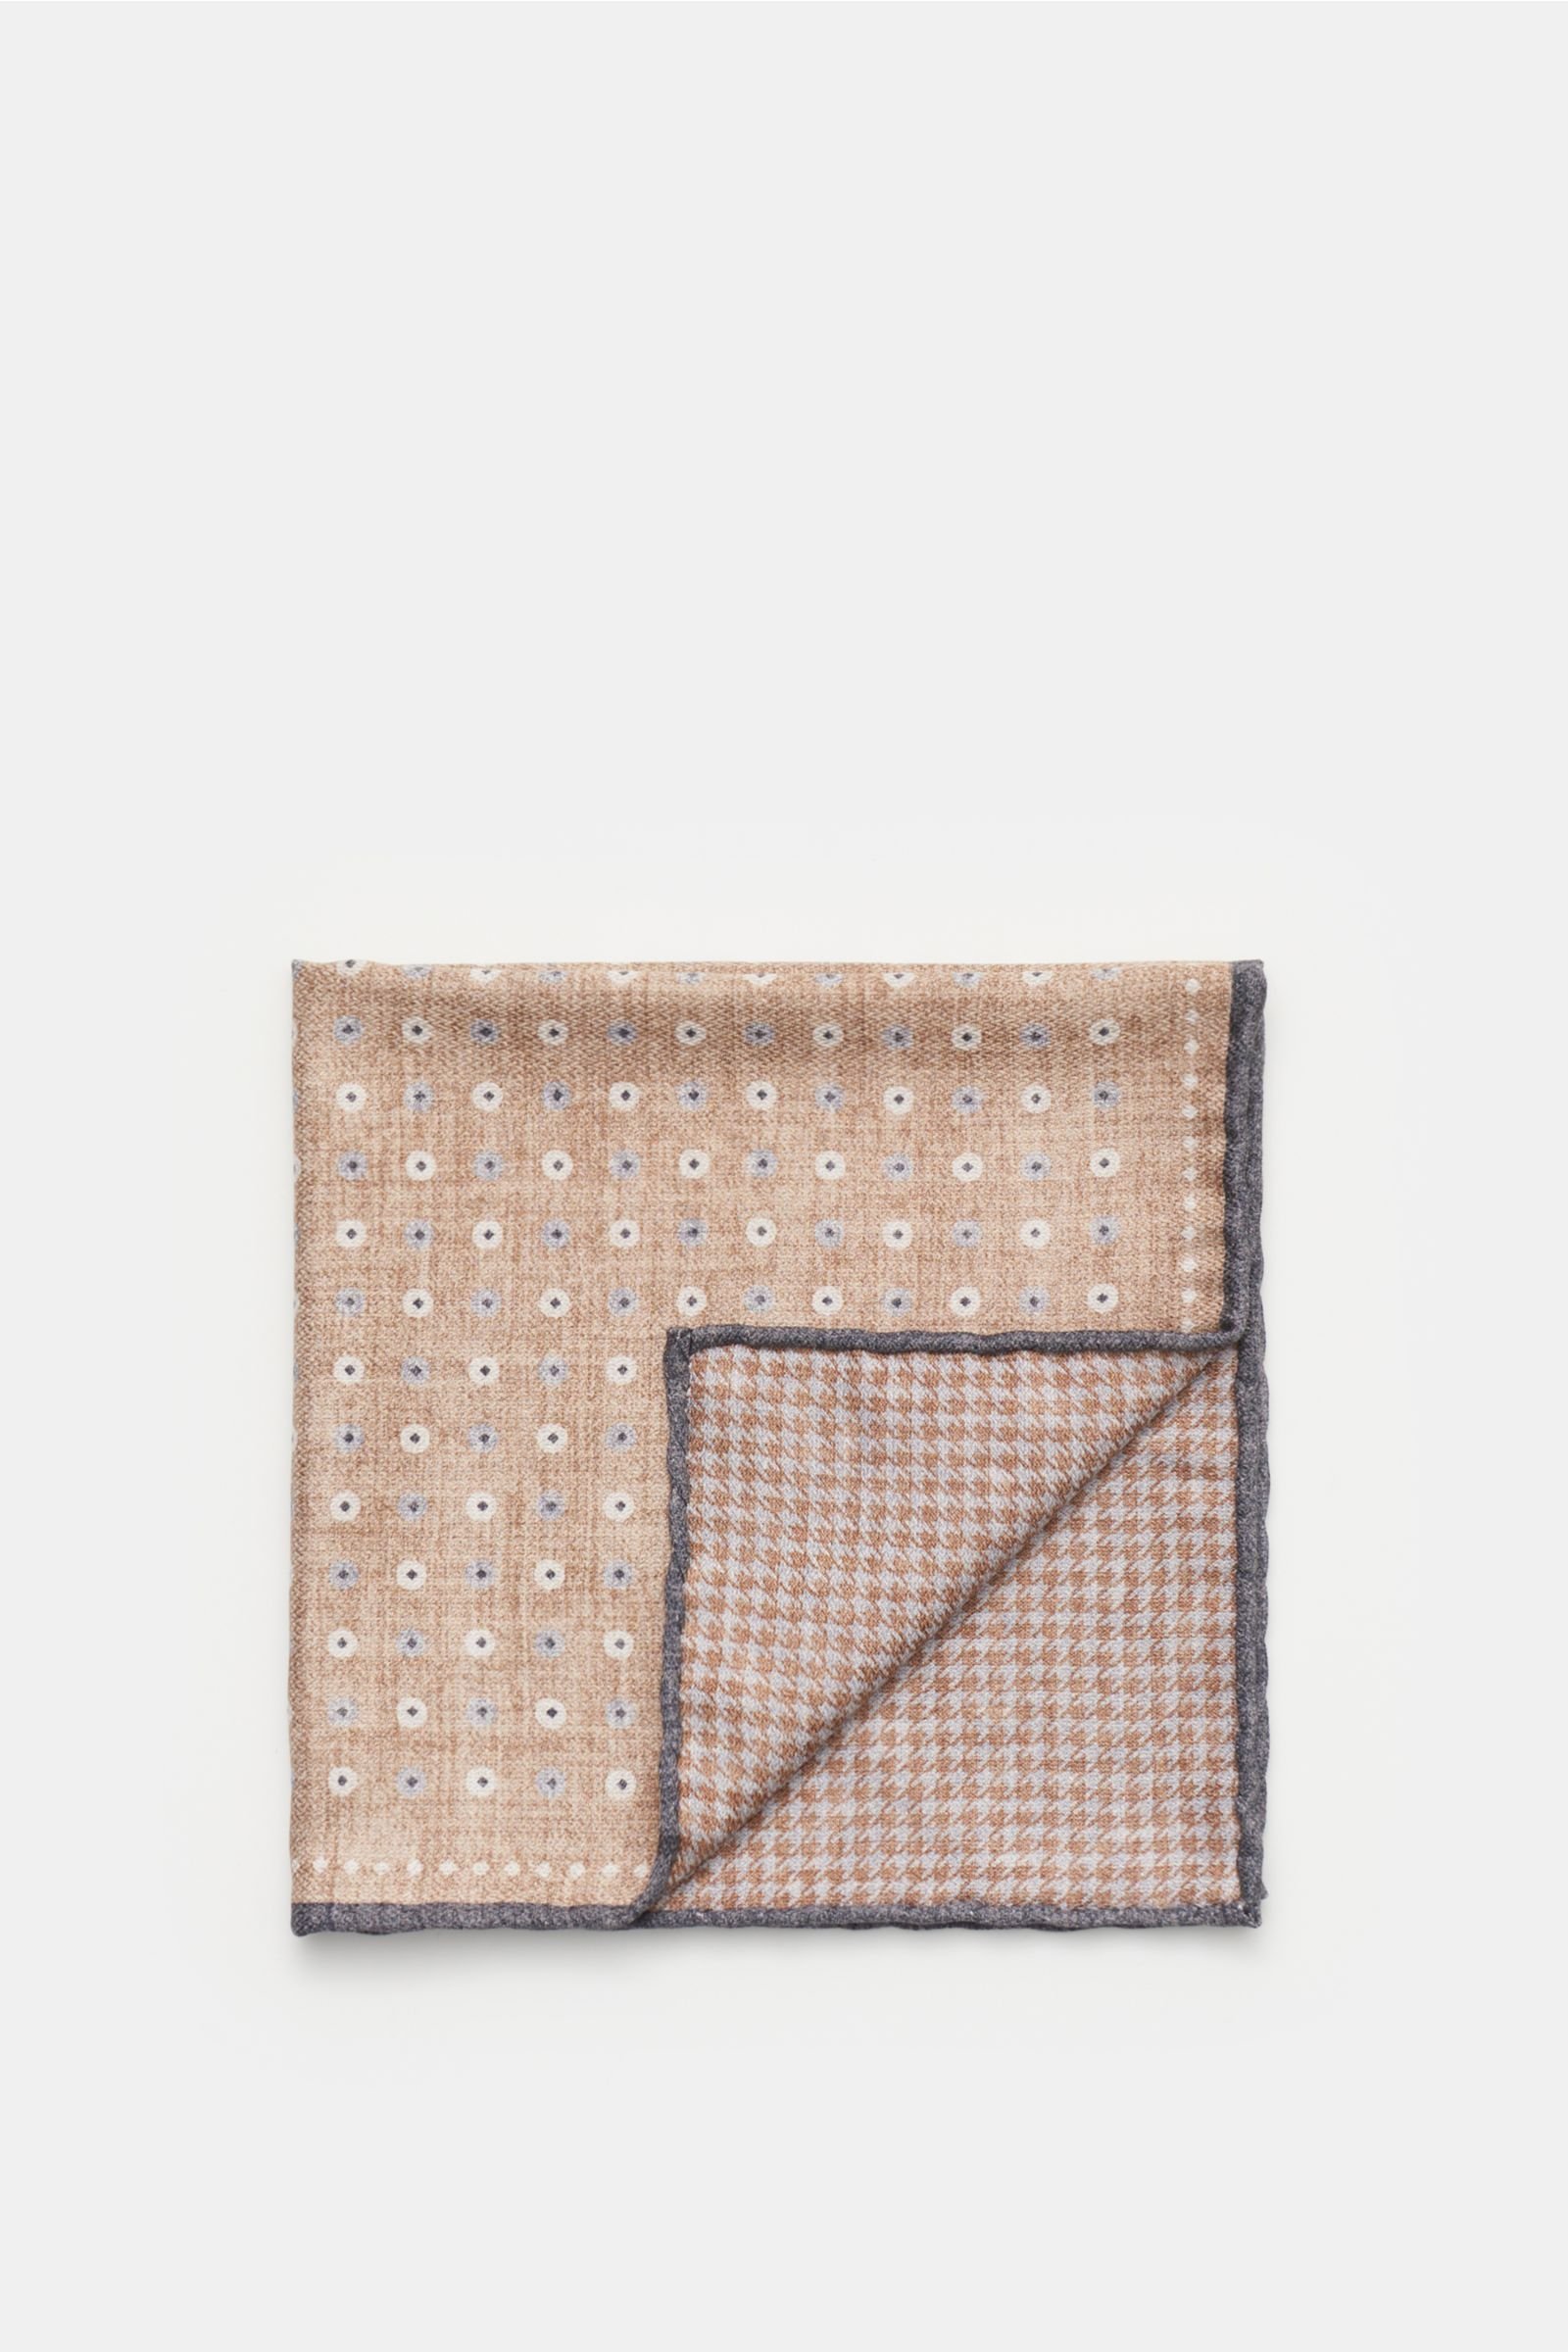 Pocket square grey-brown/grey dotted